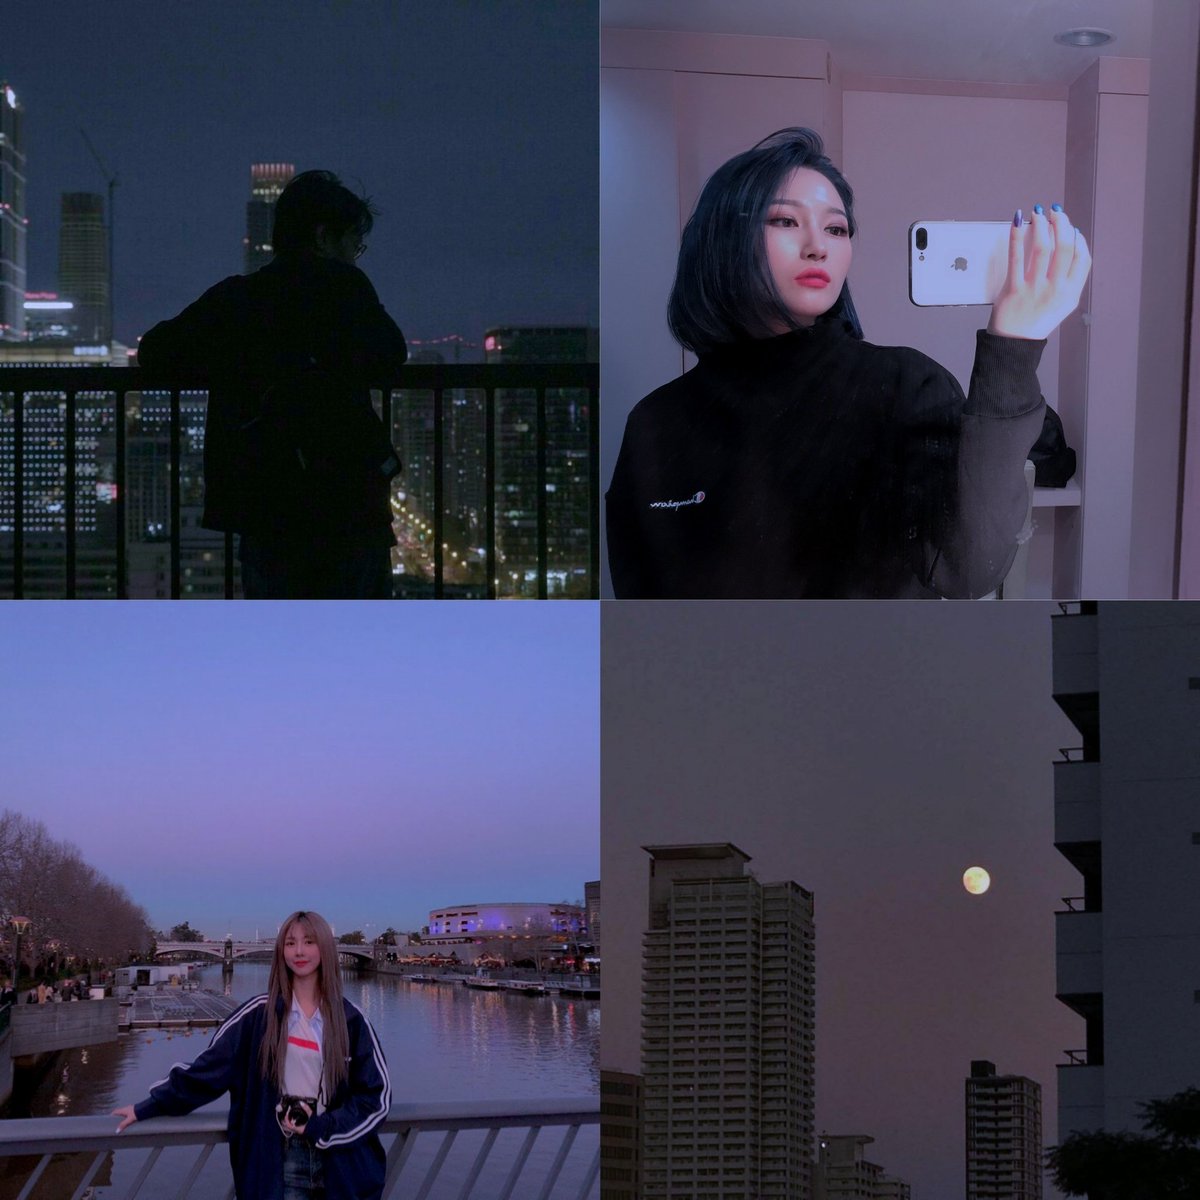 "it's the beginning of the story, aiming for a world I've never seen"yoohyeon wakes up inside of her favorite anime, "endless night". the main character, lee siyeon, is intrigued by the strange girl...